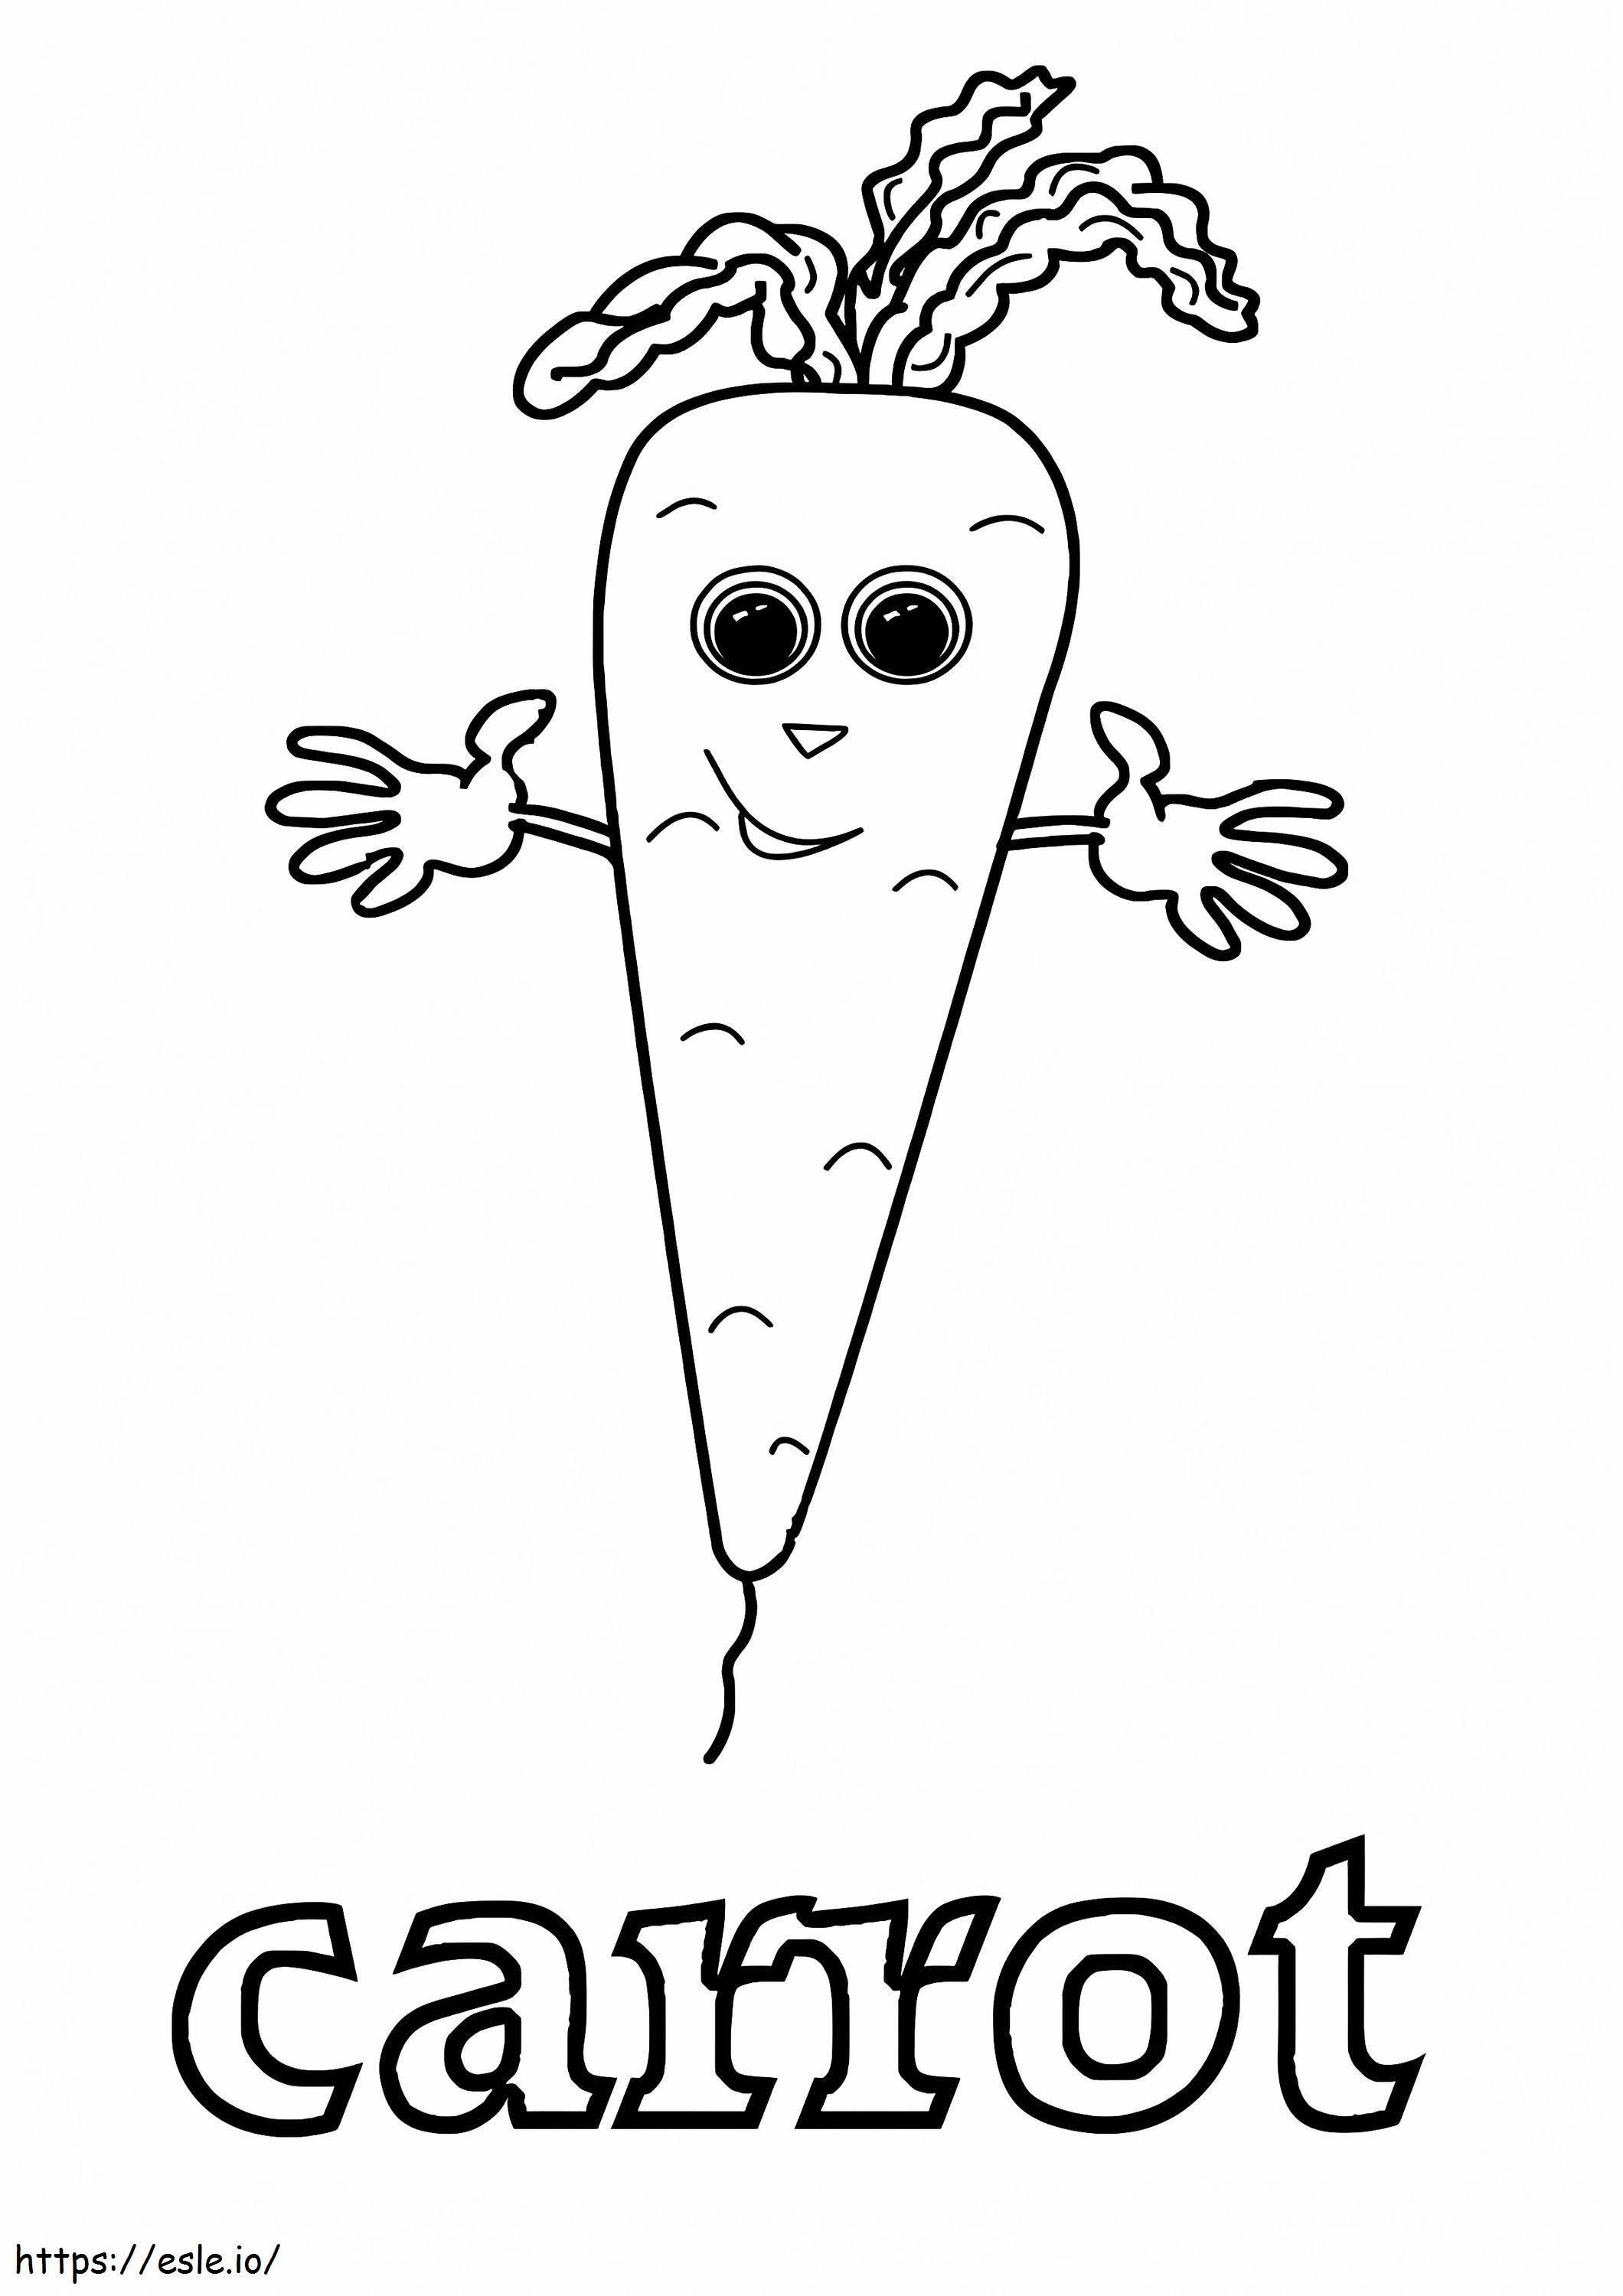 The Mr Carrot A4 coloring page